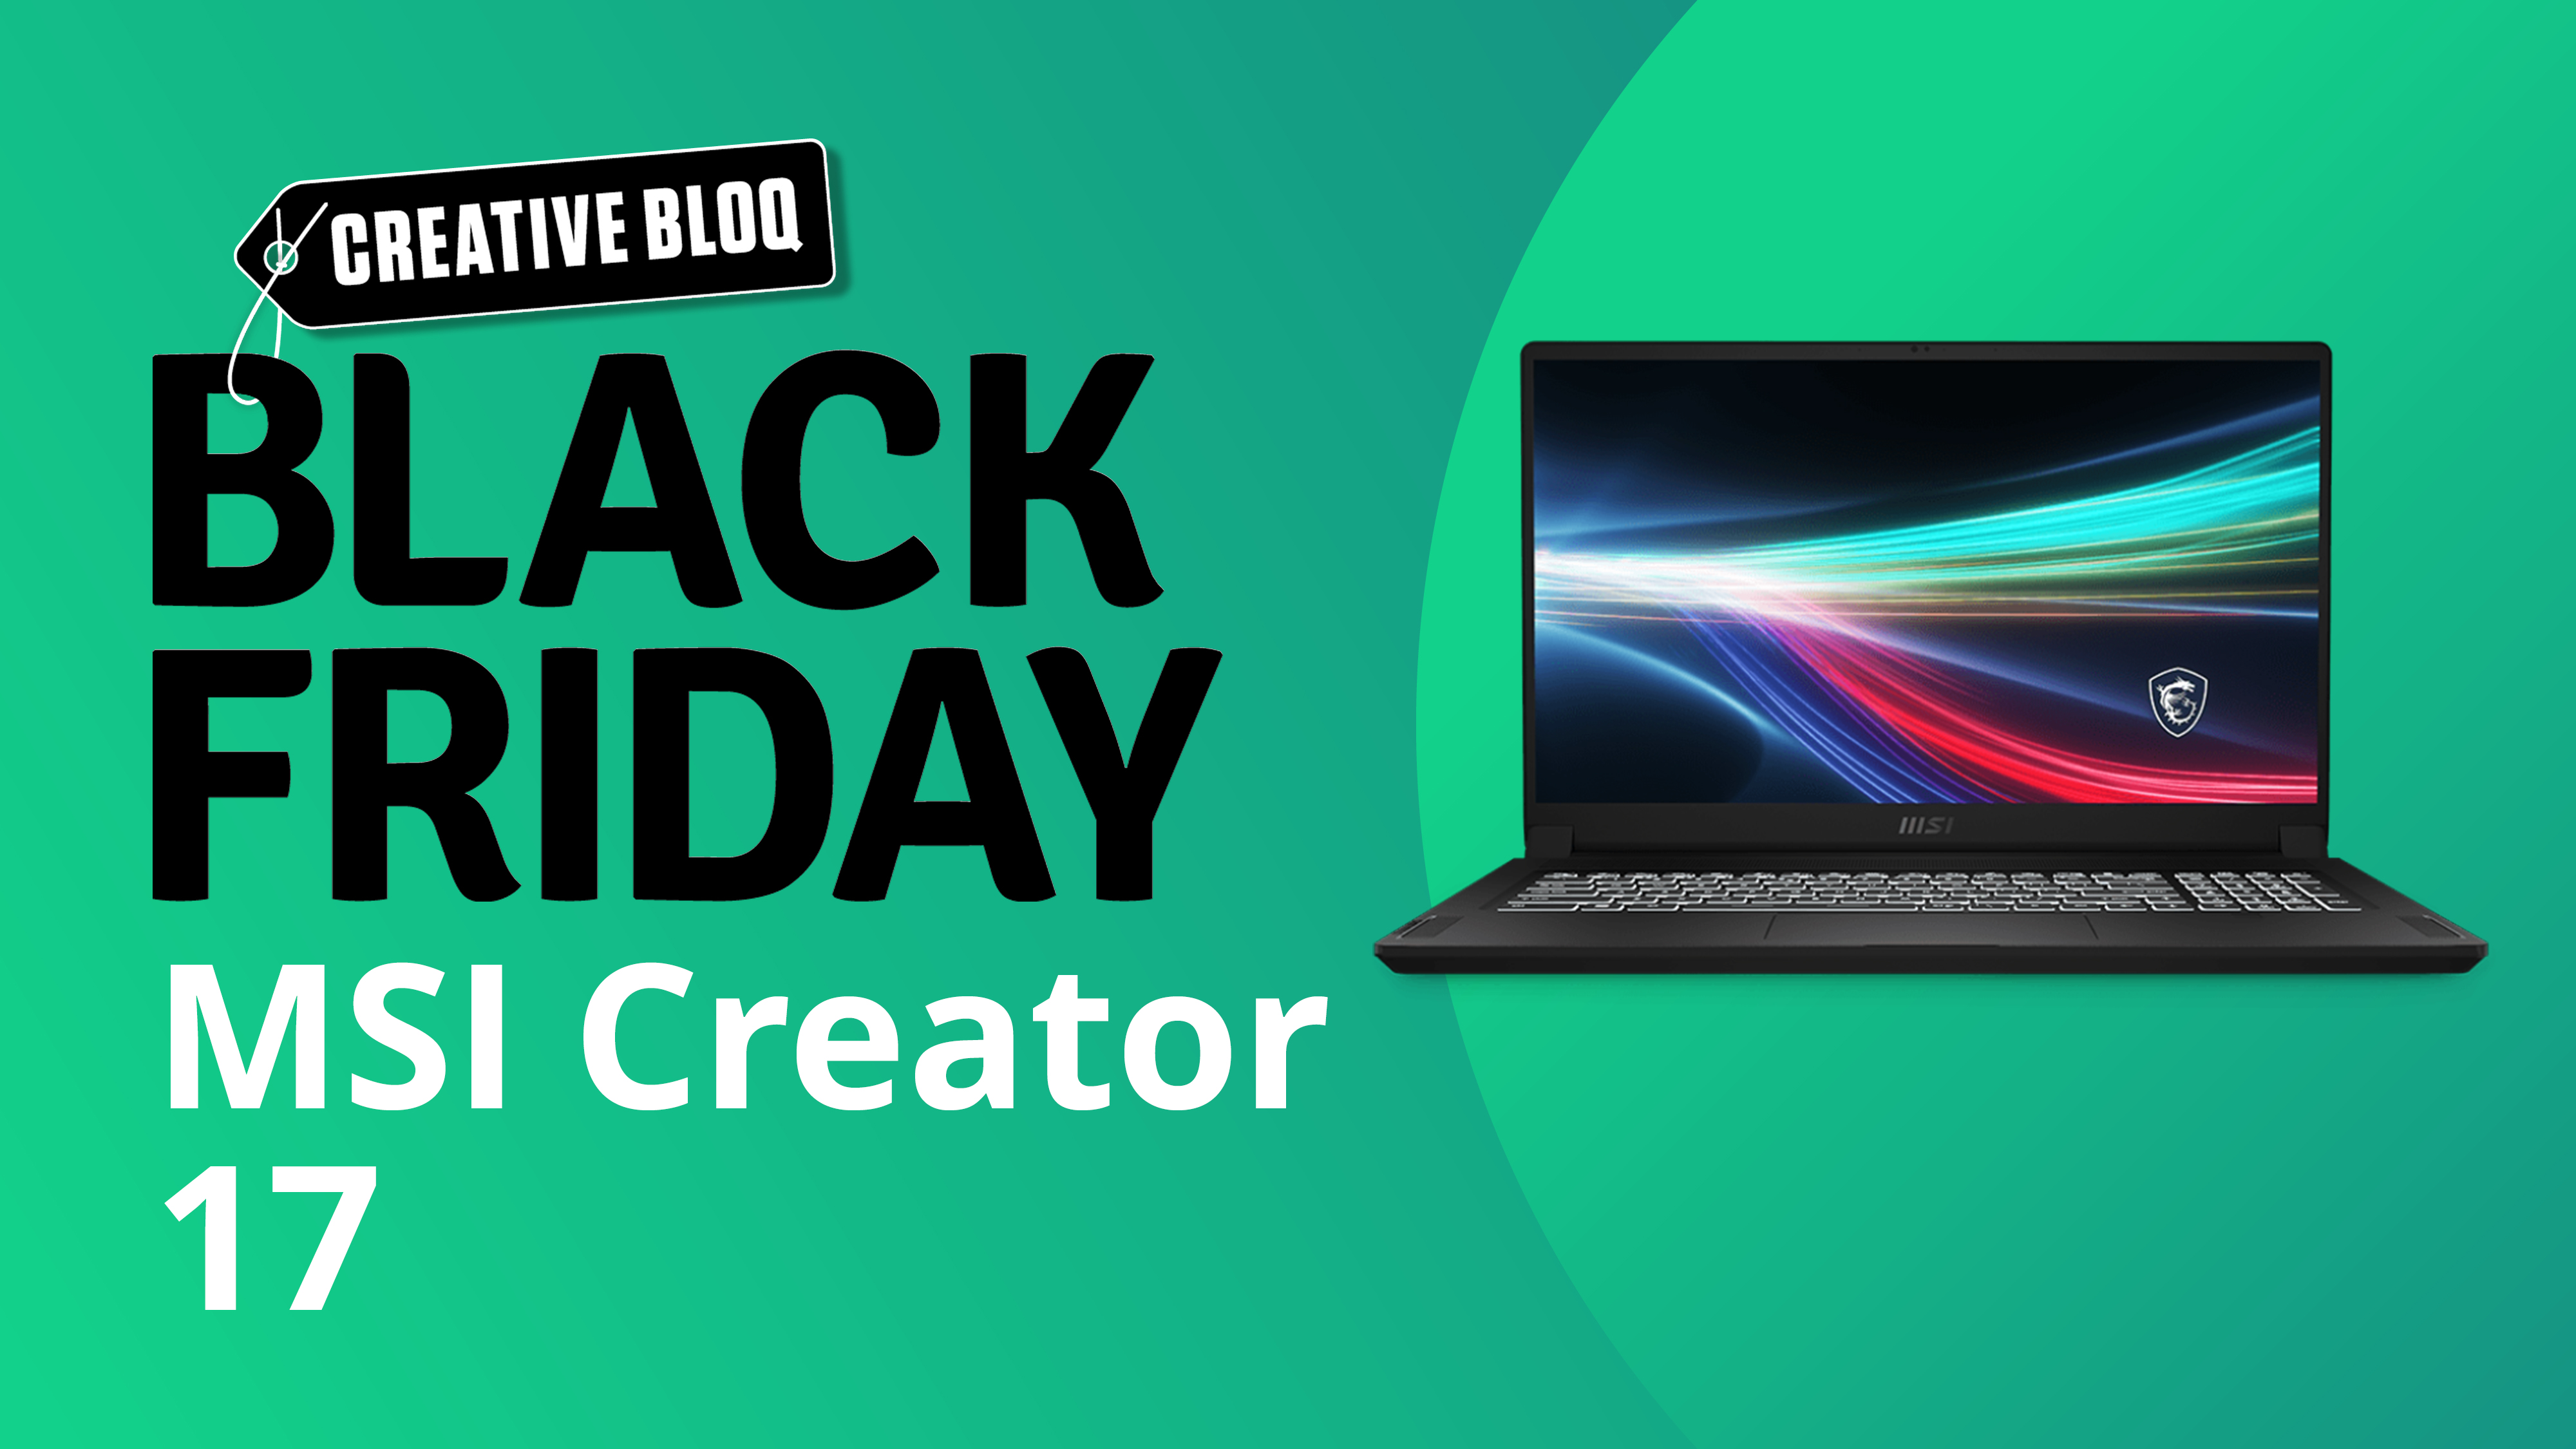 A Black Friday laptop takes an image with the text Creative Bloq Black Friday MSI Creator 17 next to a laptop image on a green background.